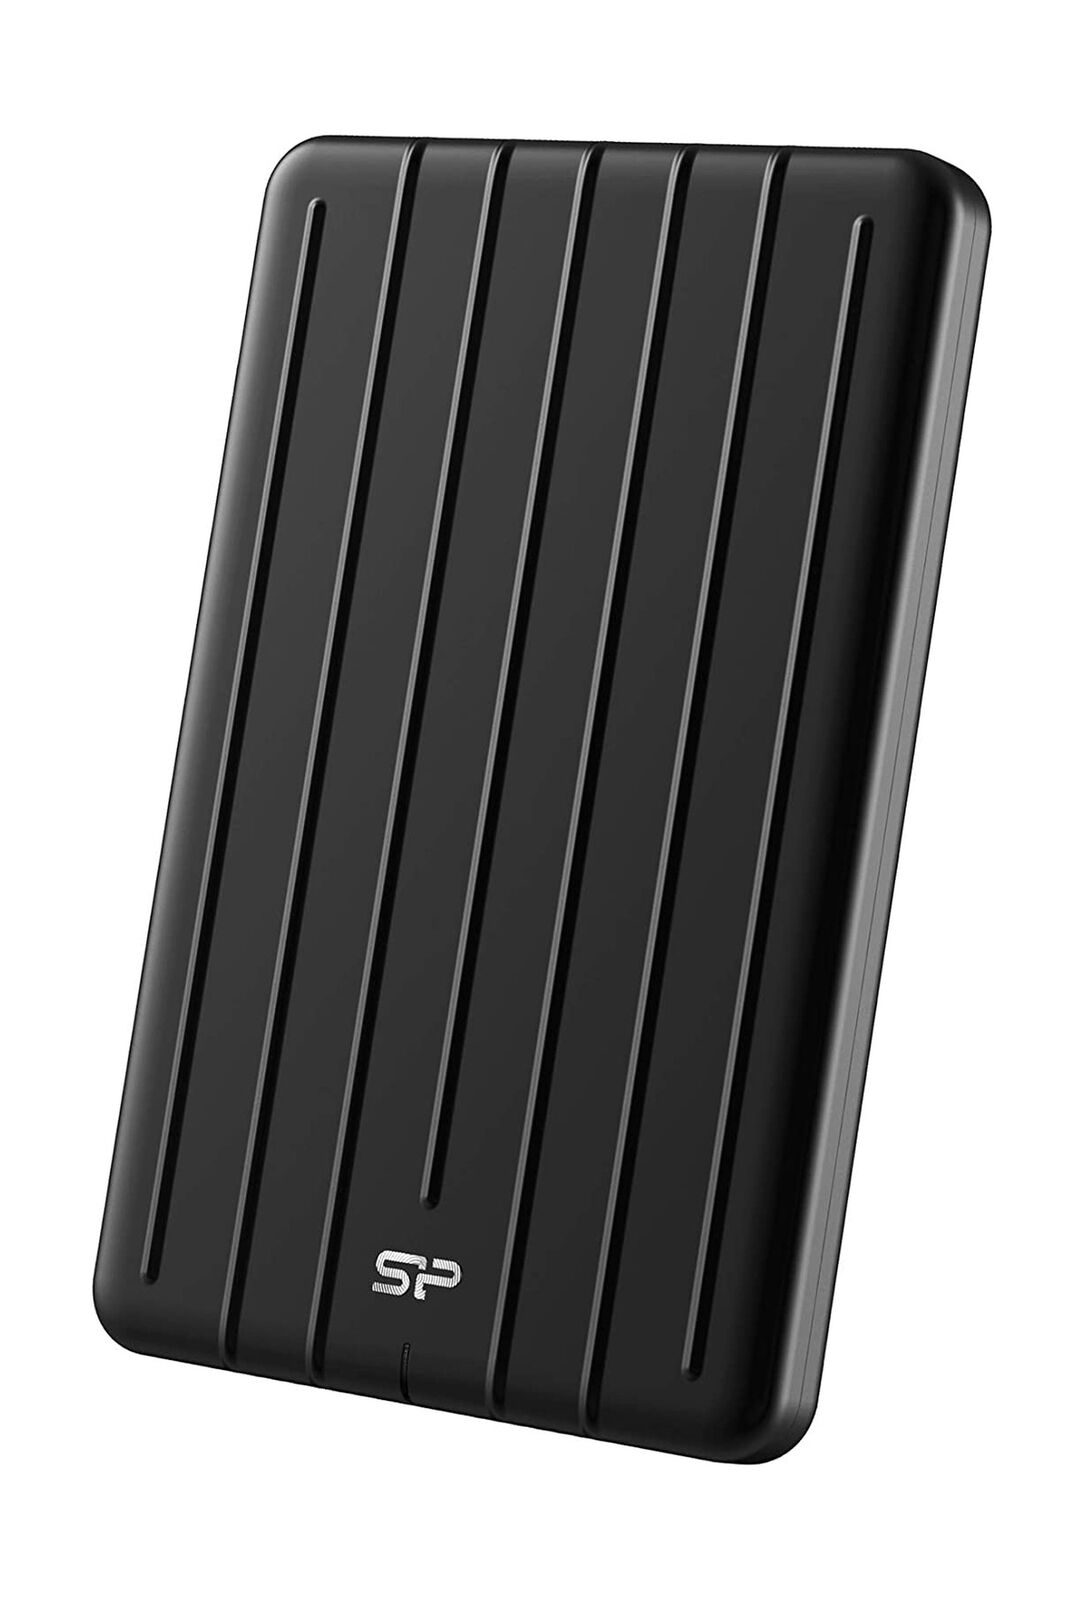 Silicon Power 4TB Rugged Portable External SSD USB 3.2 Gen 2 (USB3.2) with US...